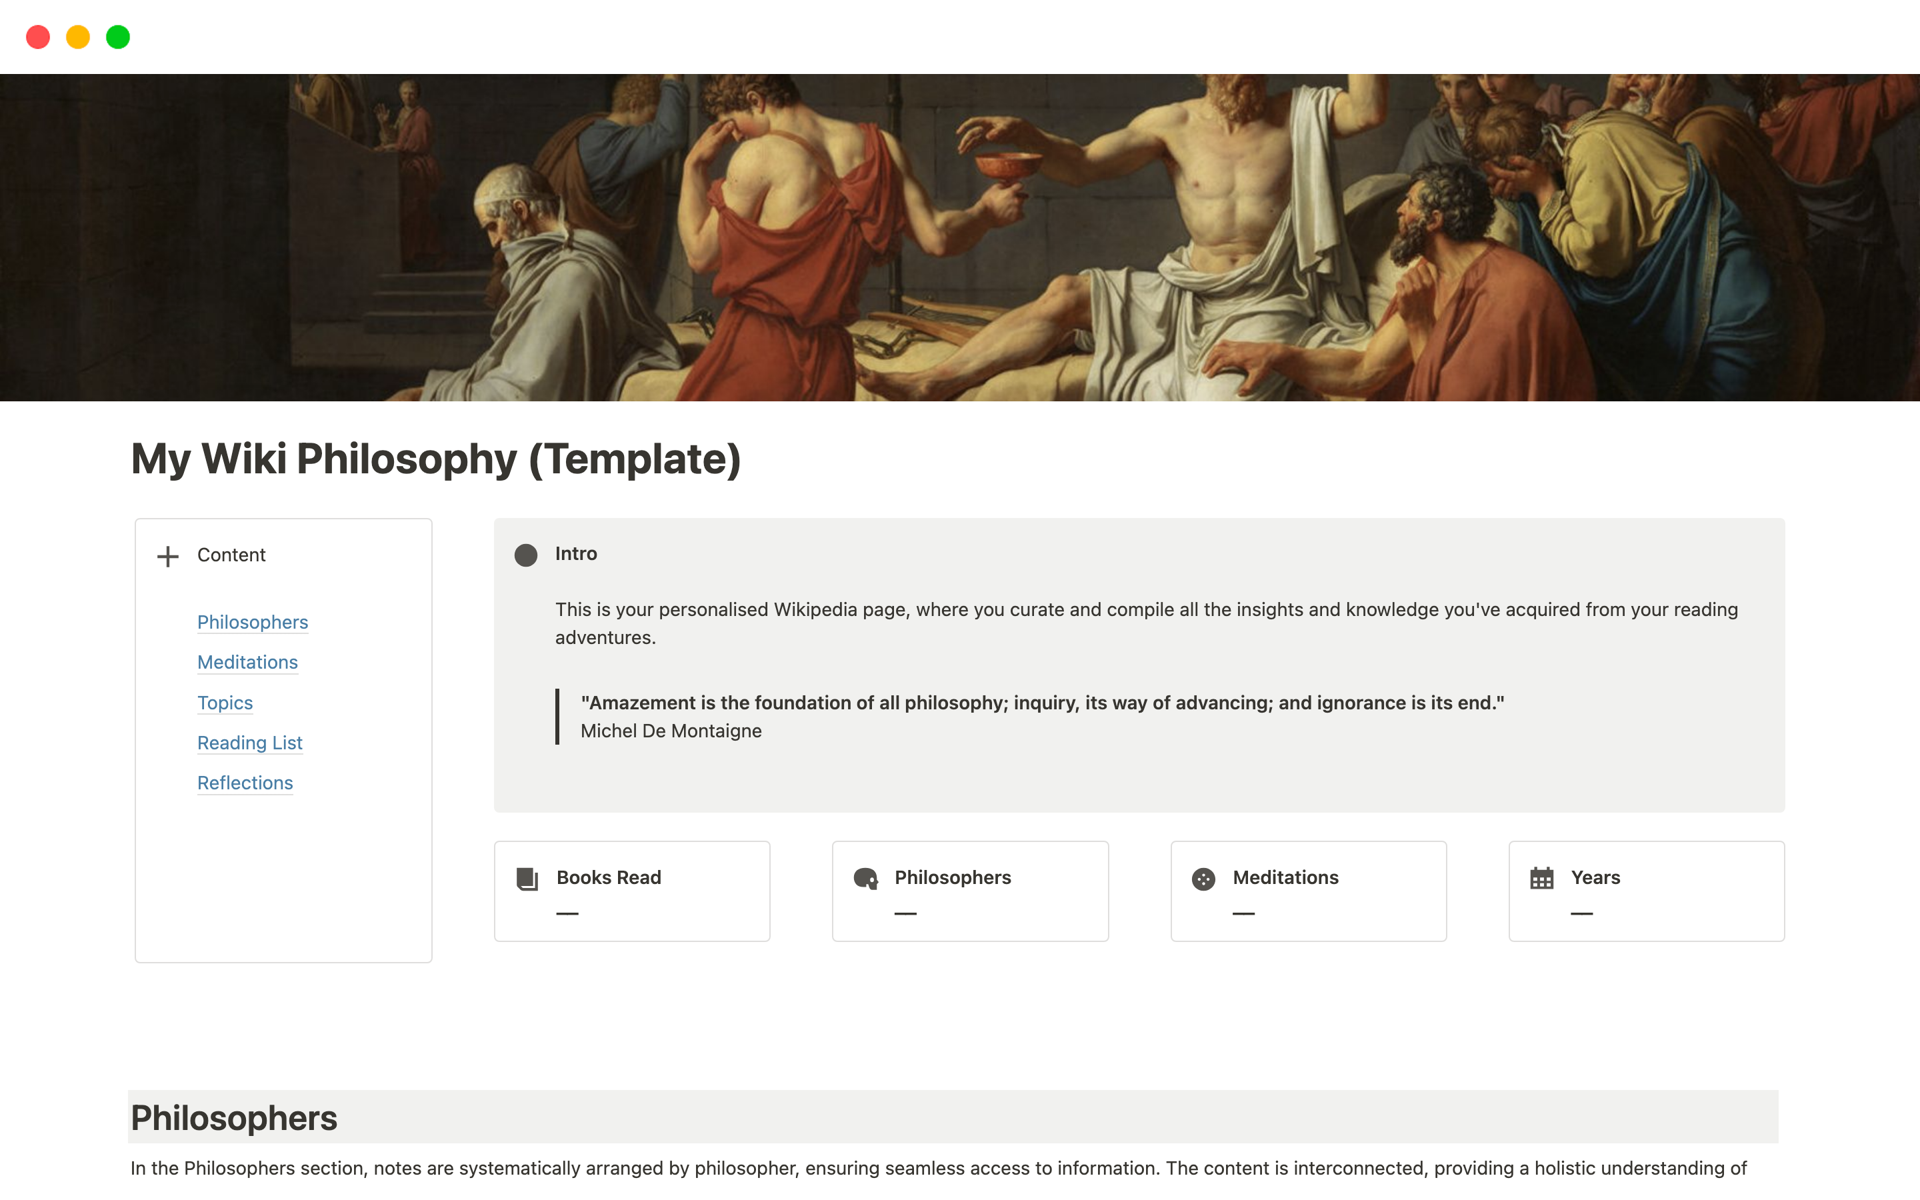 Elevate your philosophical journey with this personalized Notion template, designed to curate insights, readings, and reflections in a structured wiki format.